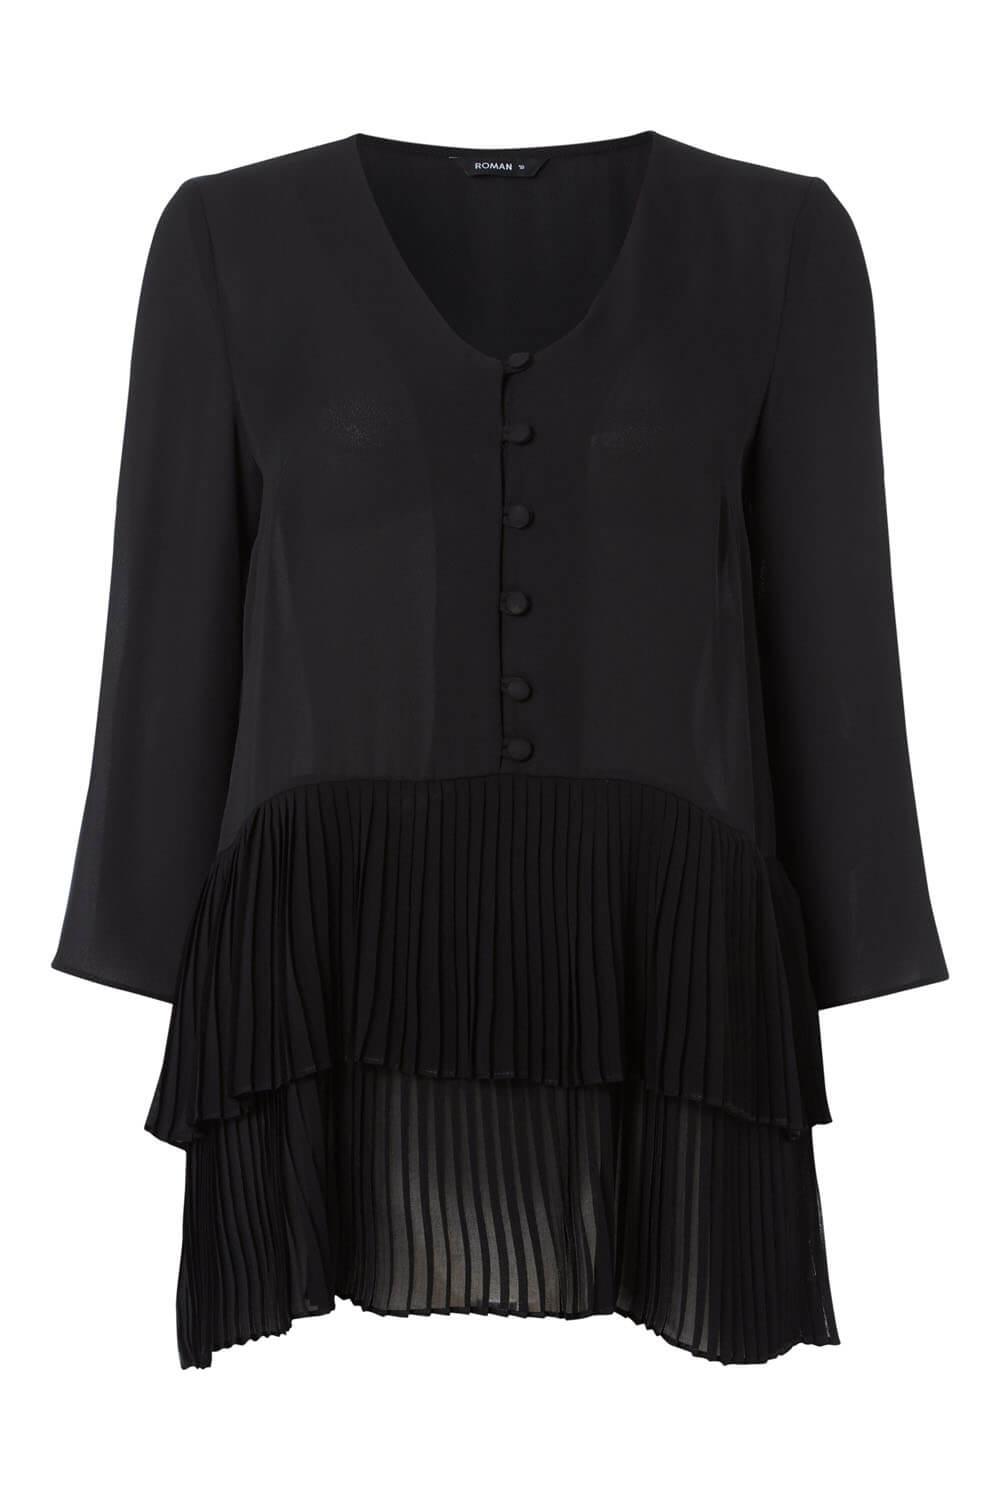 3/4 Sleeve Pleated Button Front Top in Black - Roman Originals UK